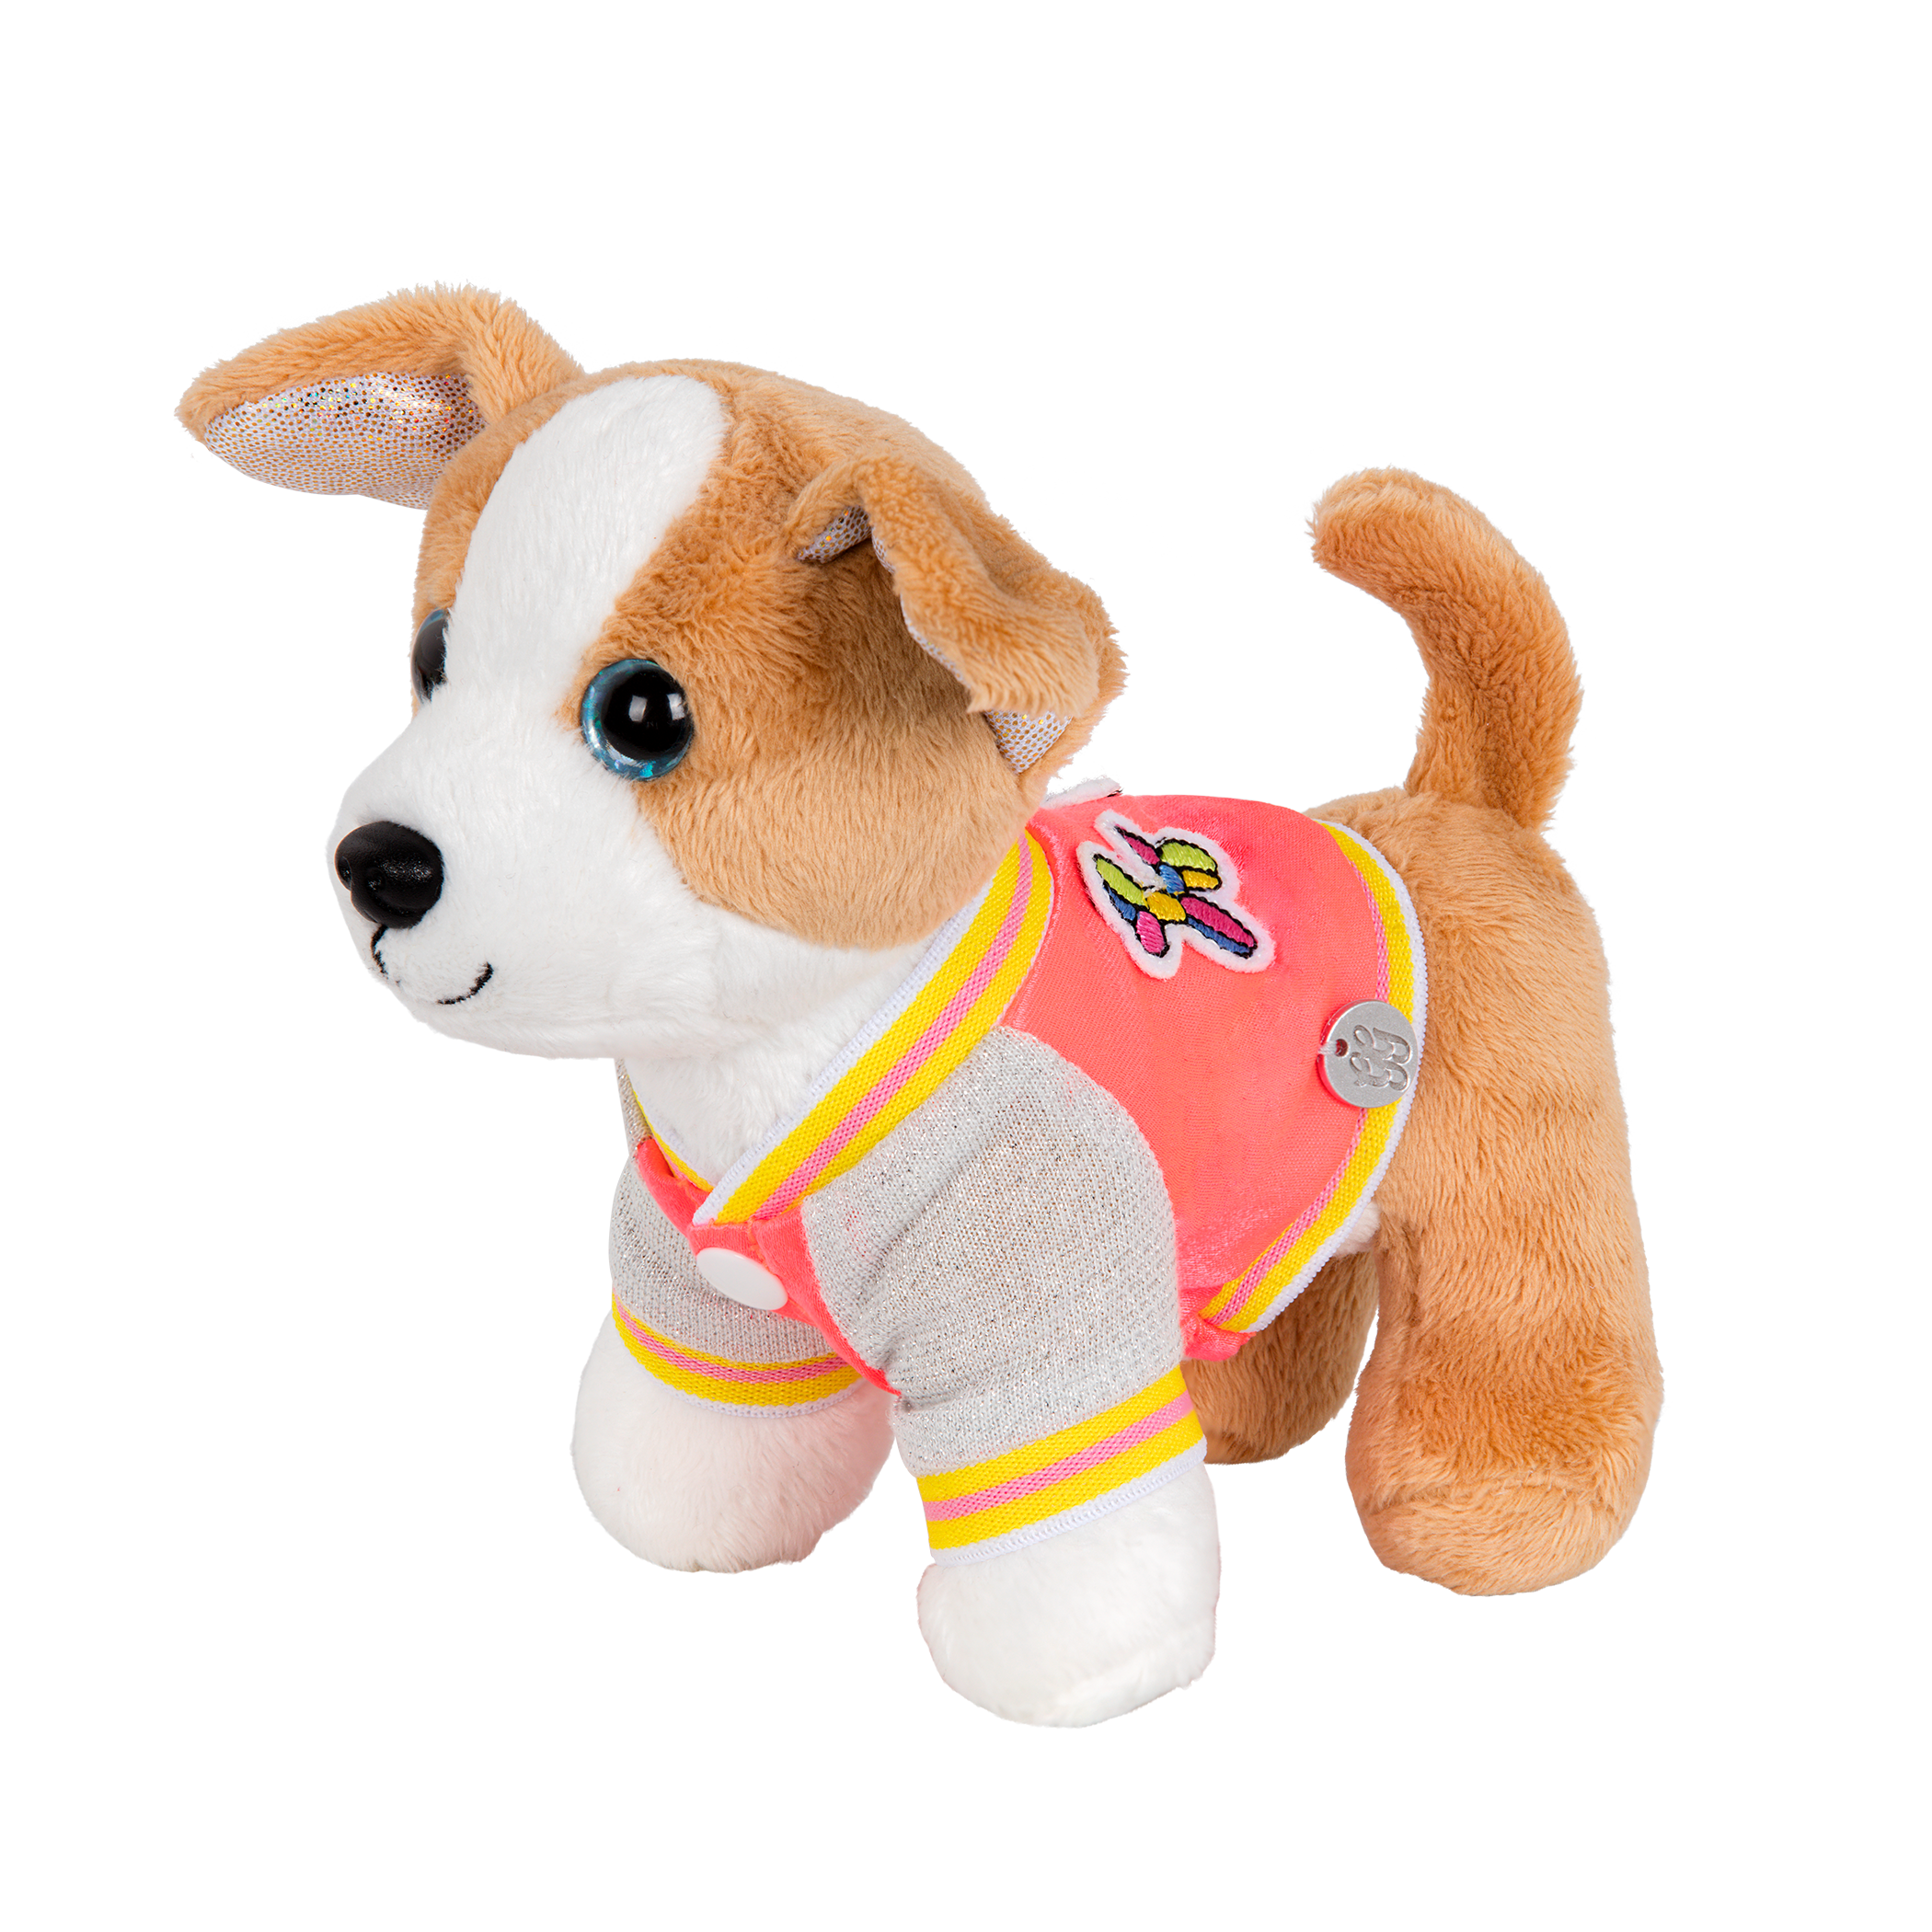 https://myglittergirls.com/wp-content/uploads/GG57150_Sporty-jacket-fun-animal-patches-pet-outfit.png